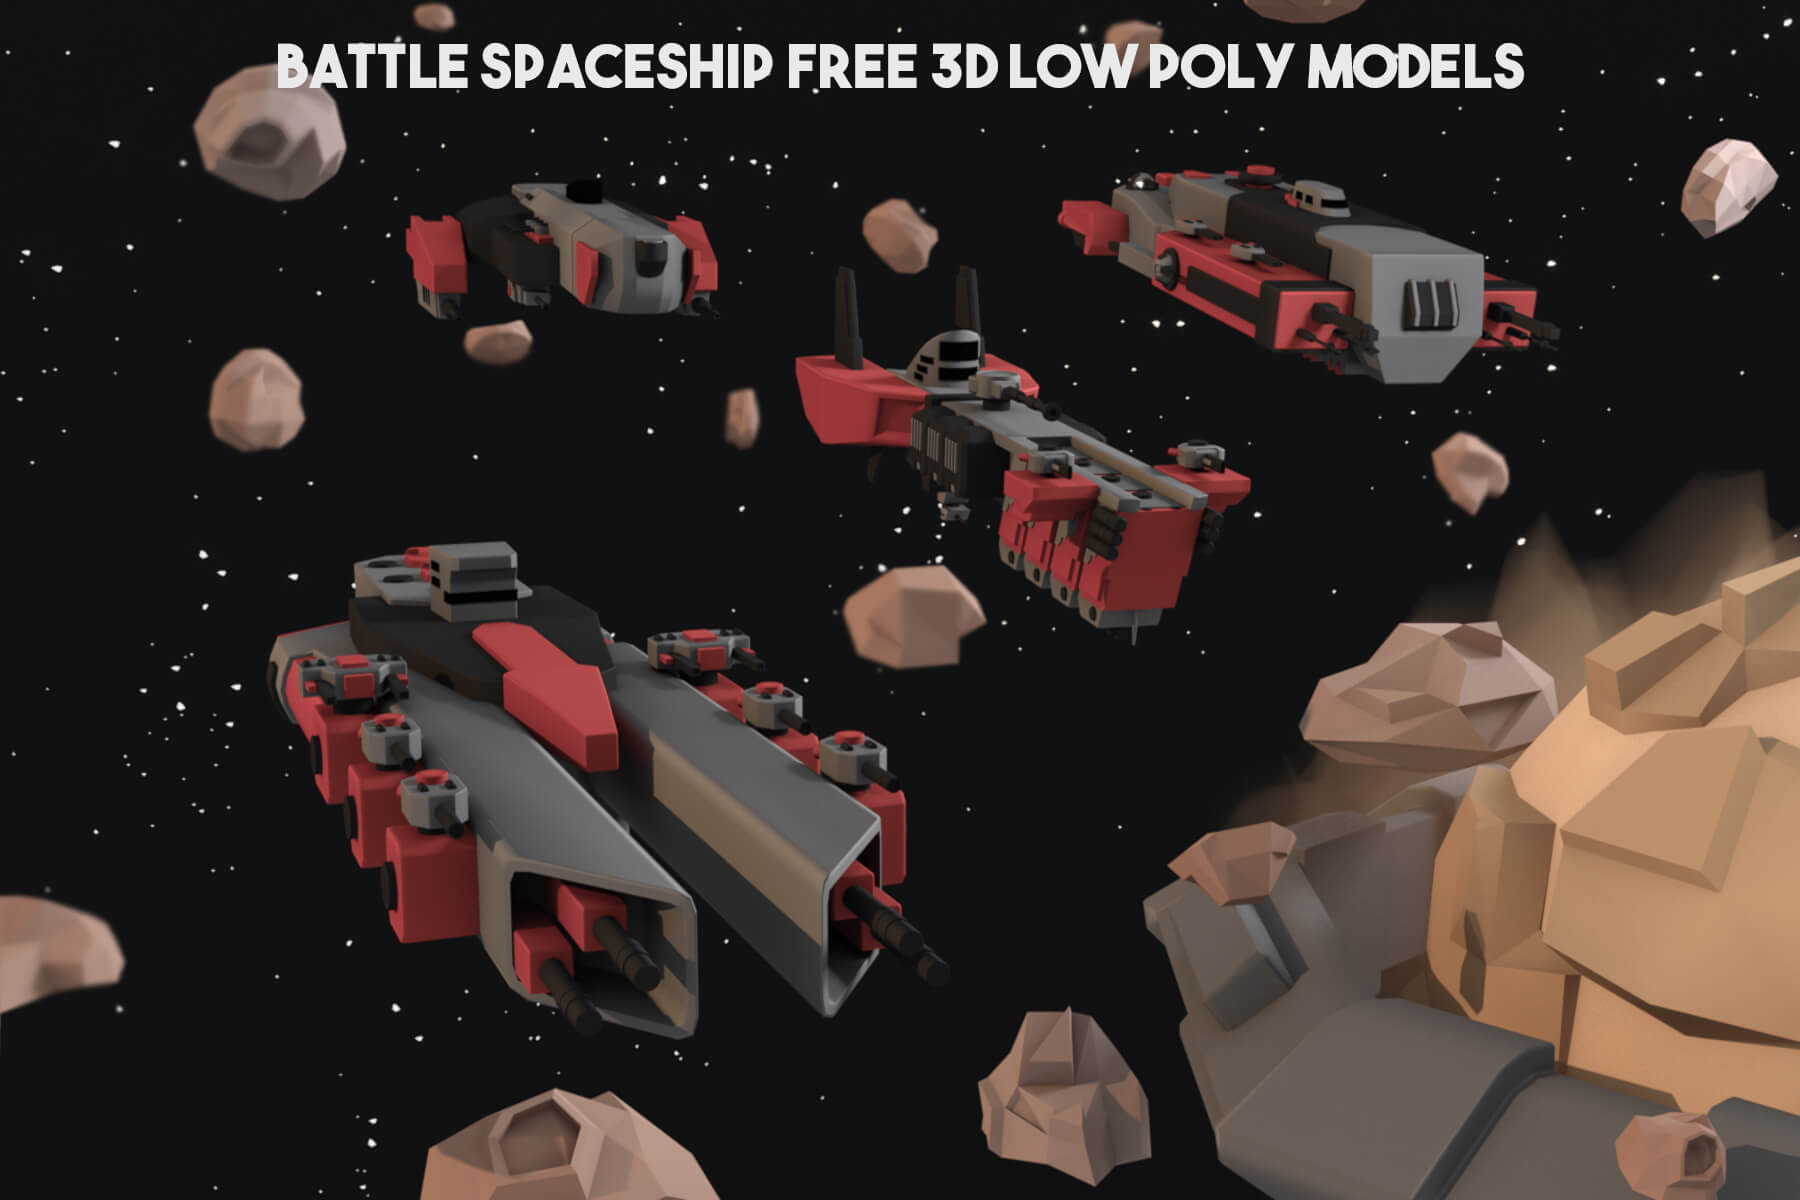 Battle SpaceShip Free 3D Low Poly Models Download 